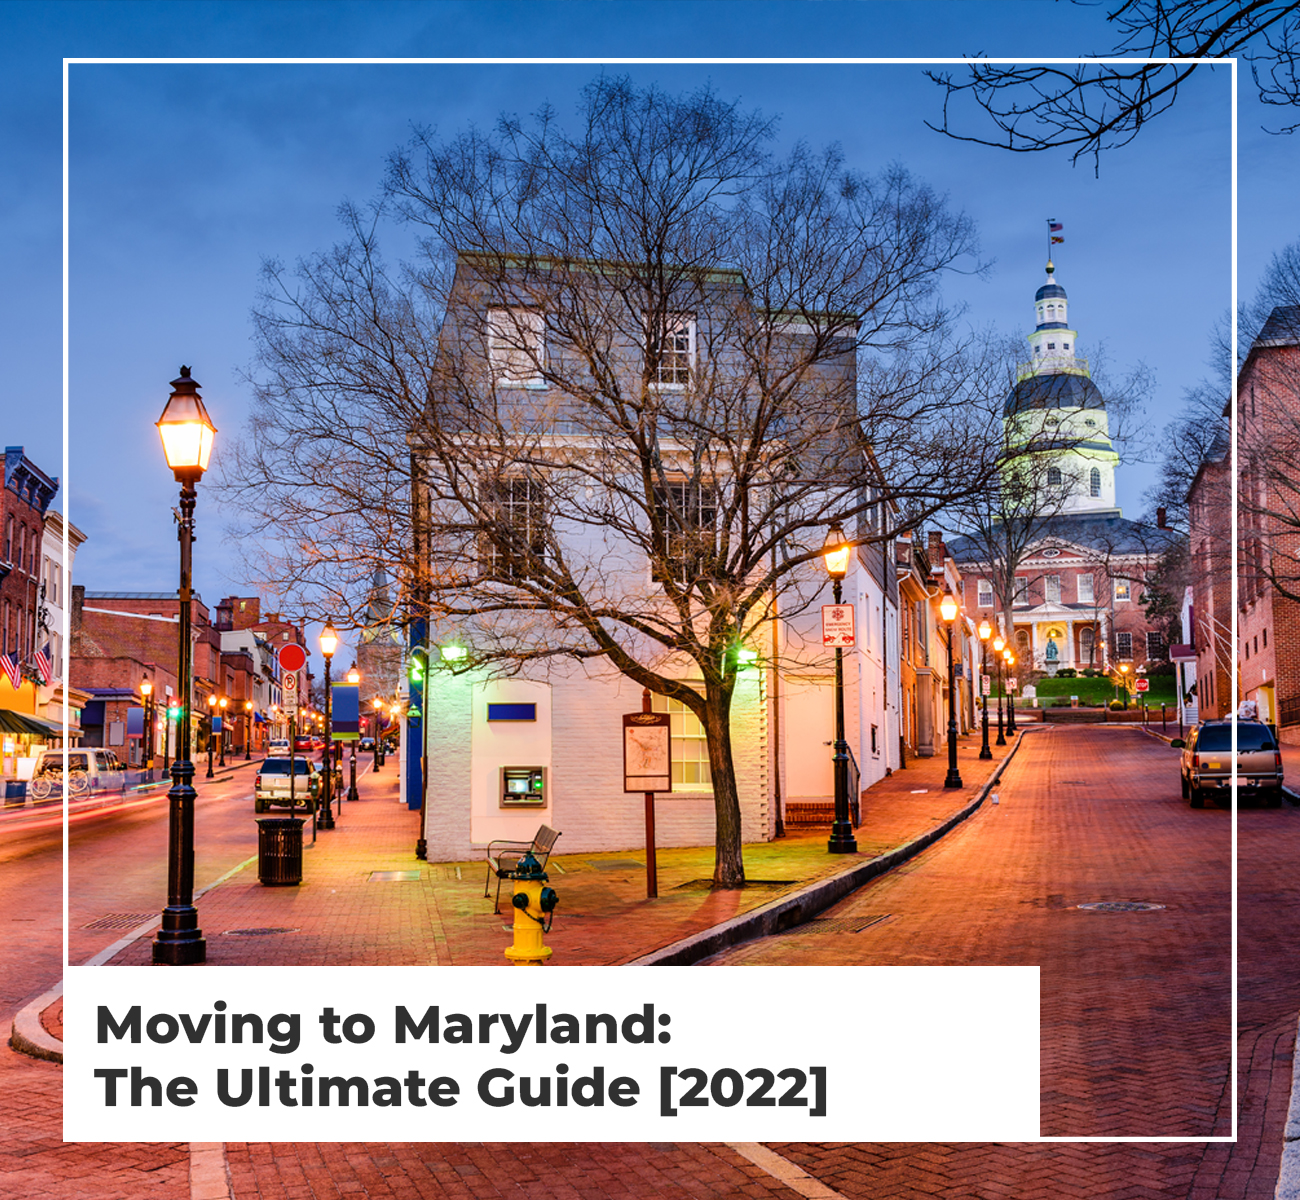 Moving to Maryland: The Ultimate Guide [2022]